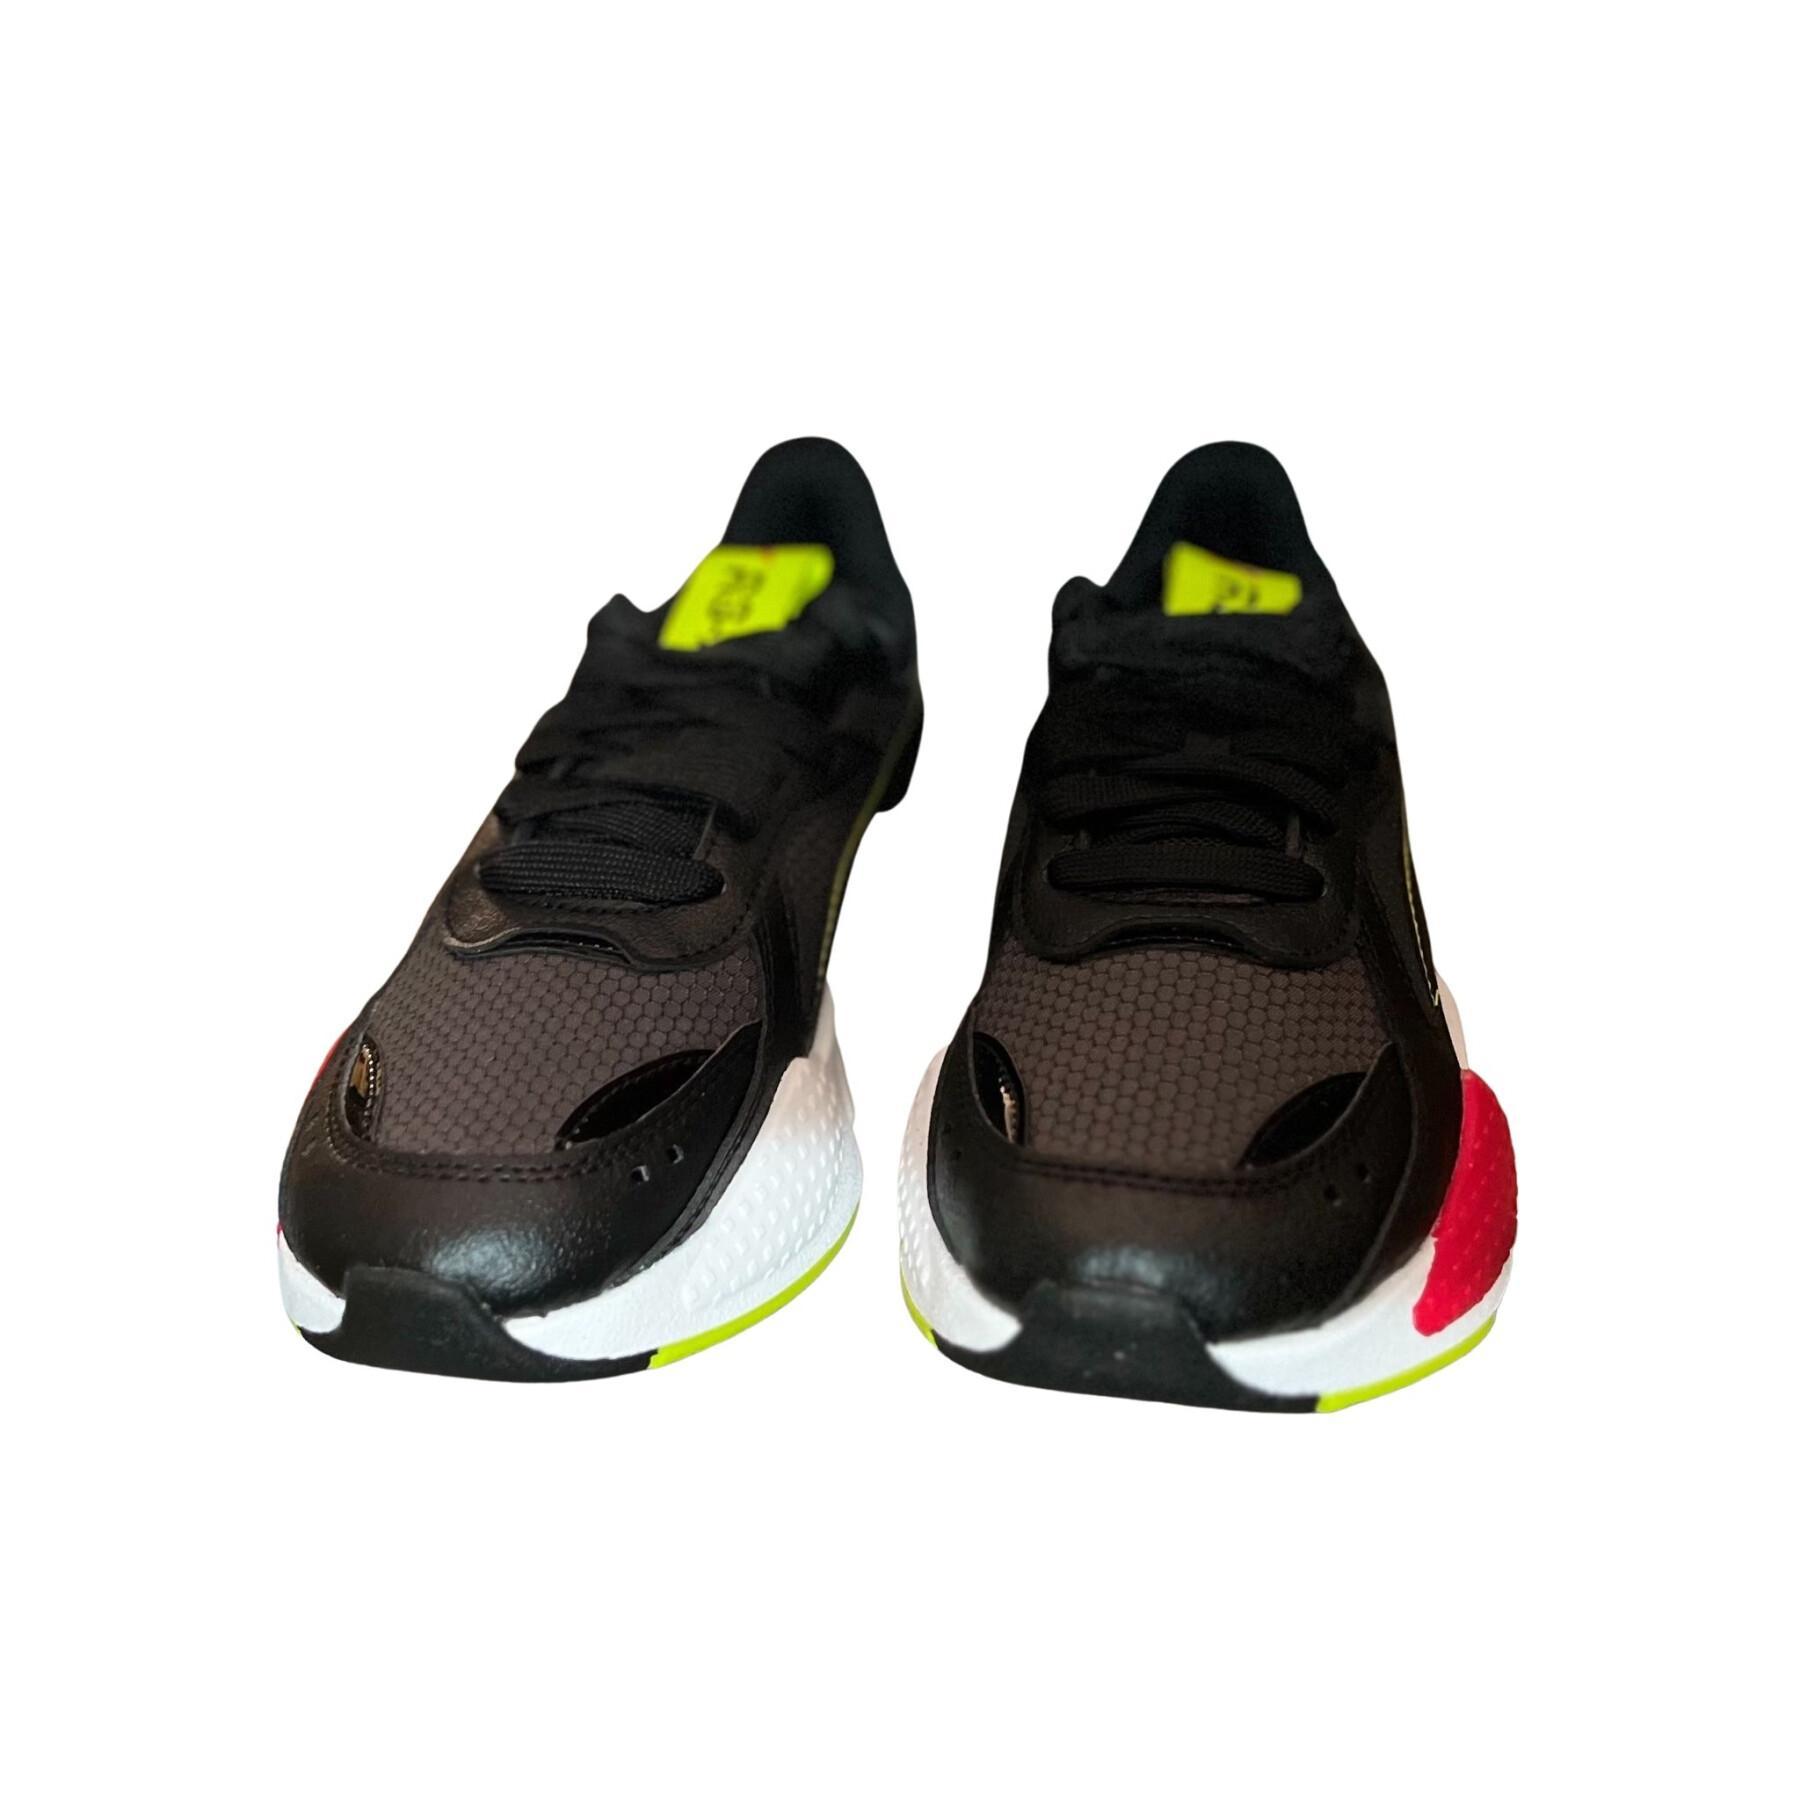 Children's sneakers Puma RS-X EOS